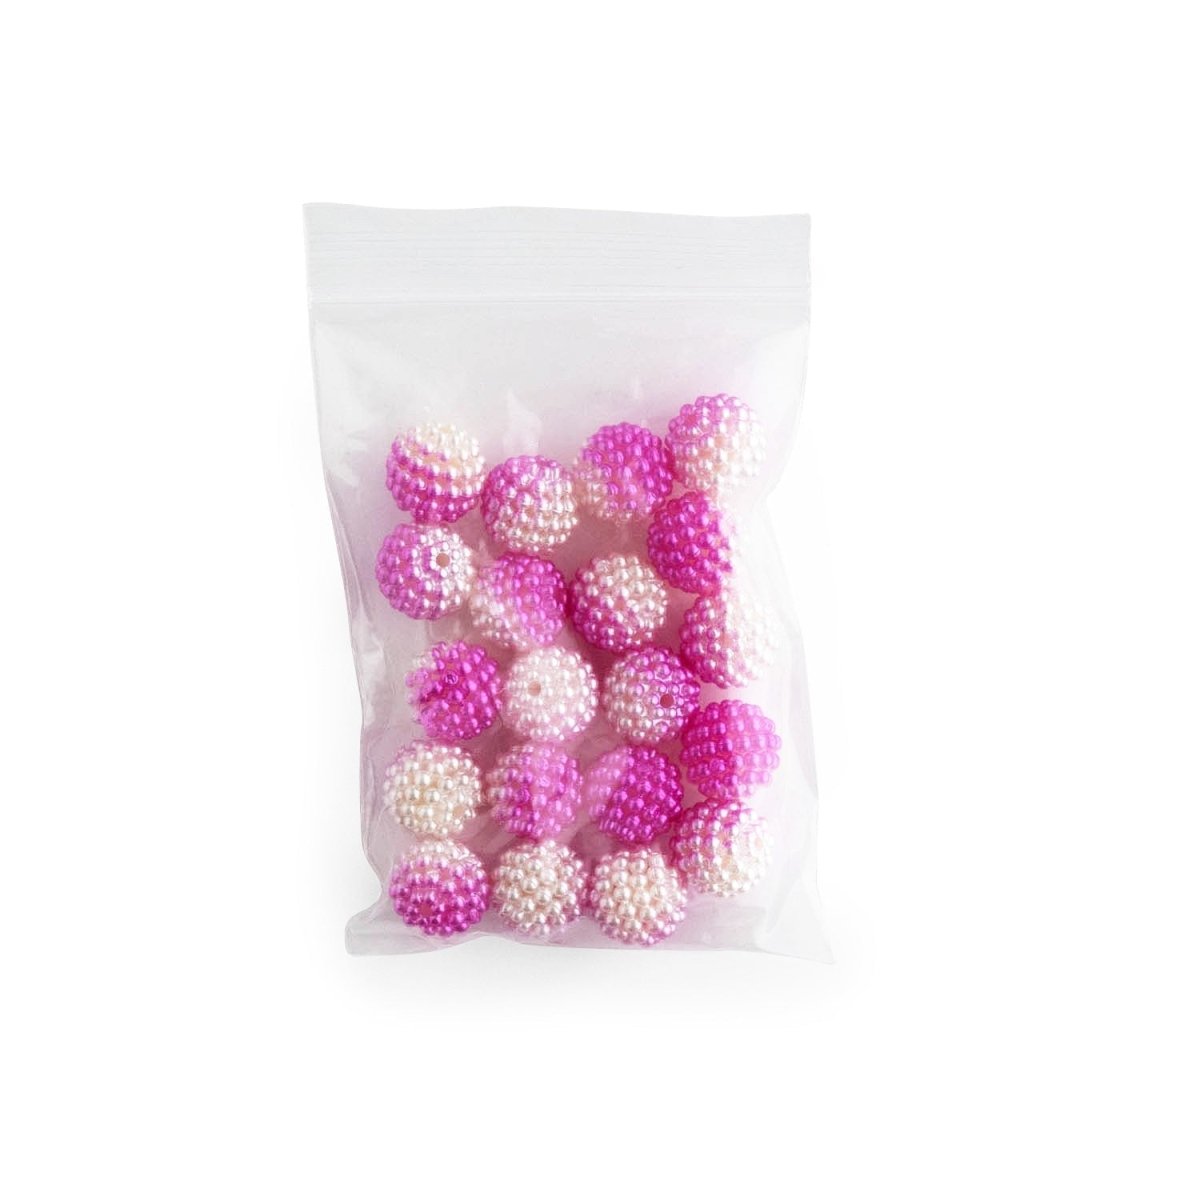 Acrylic Round Beads Ombre Pearl Berry Rhinestones 10mm Fuchsia from Cara & Co Craft Supply